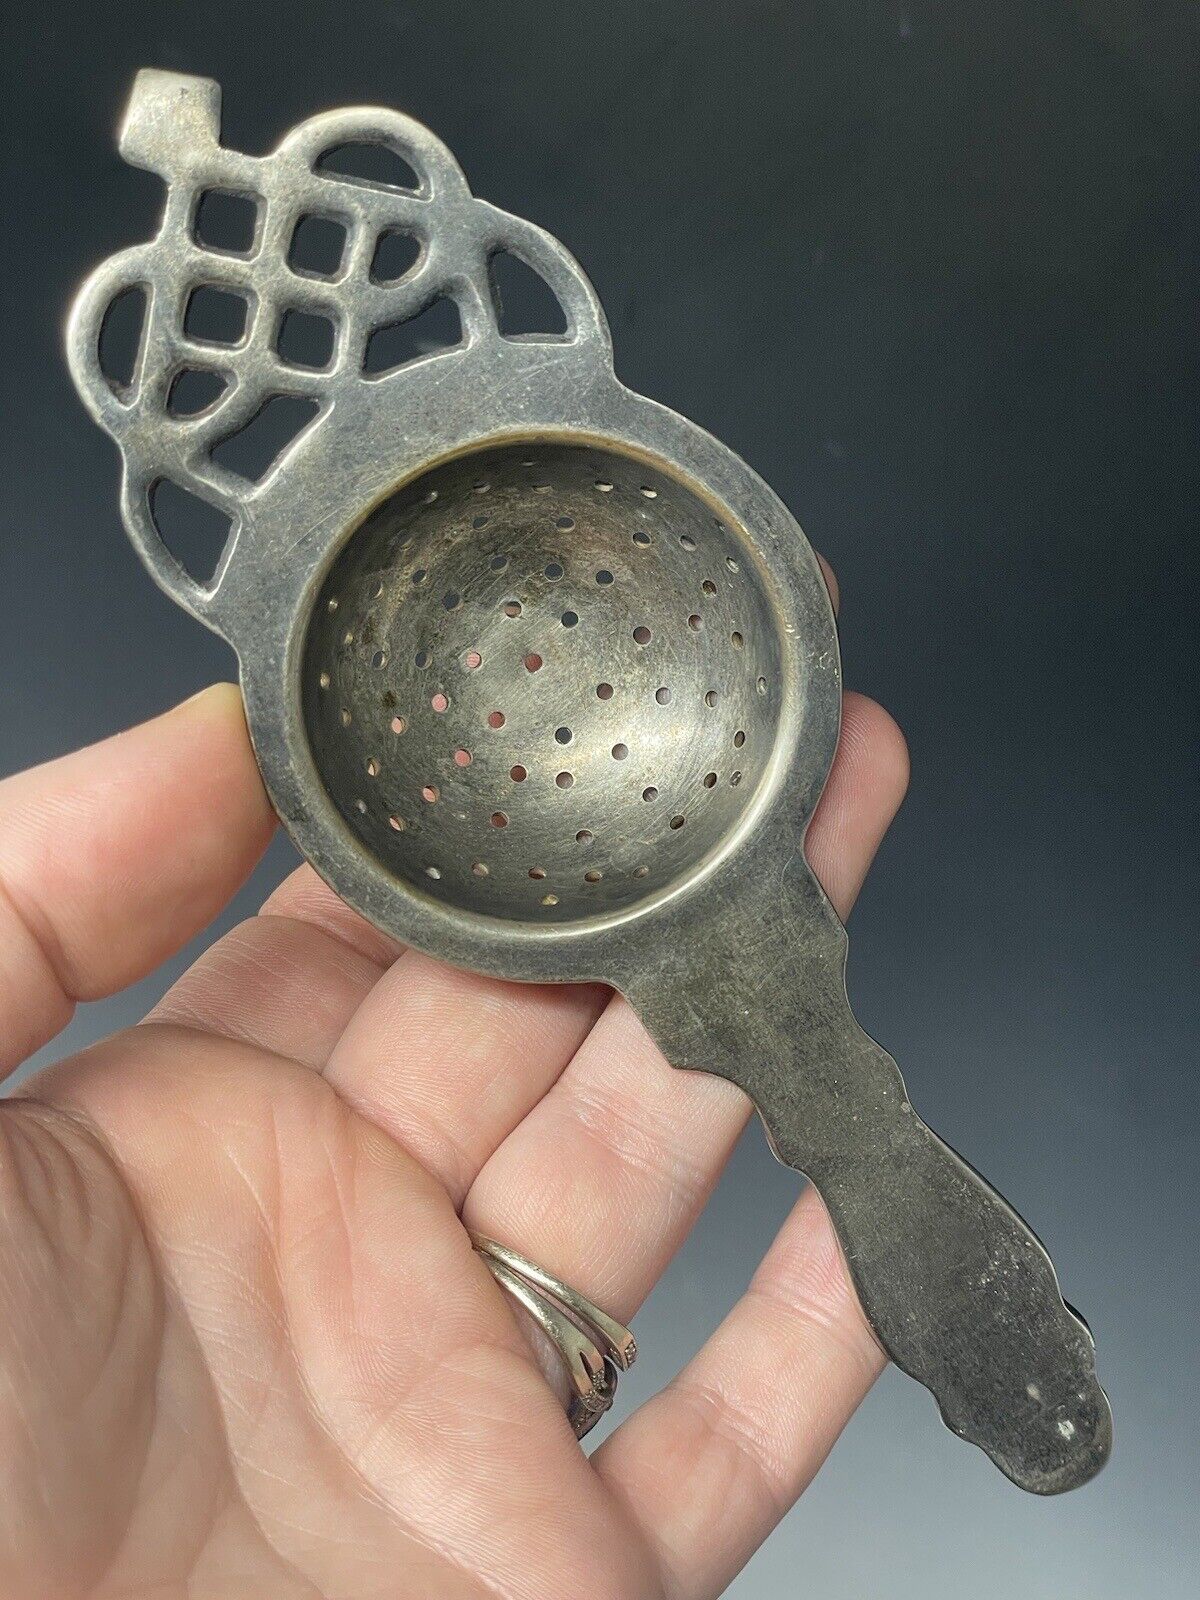 Antique Silverplated Tea Strainer Victorian - Edwardian Era 19th - Early 20th C.